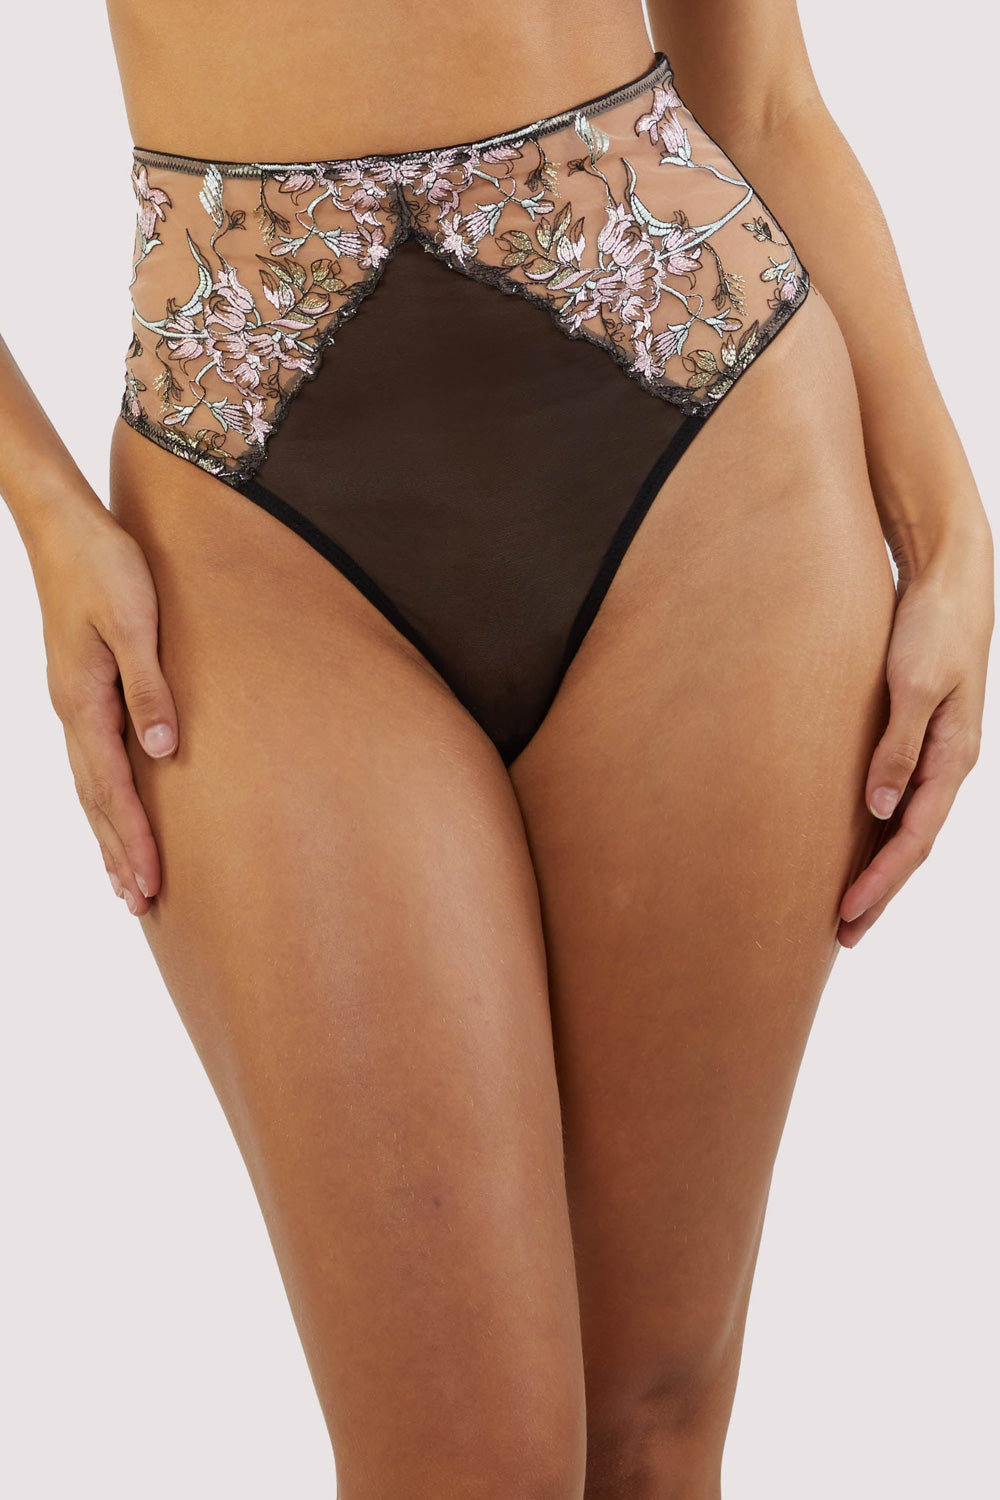 Playful Promises Mayla Embroidered High Waist Thong